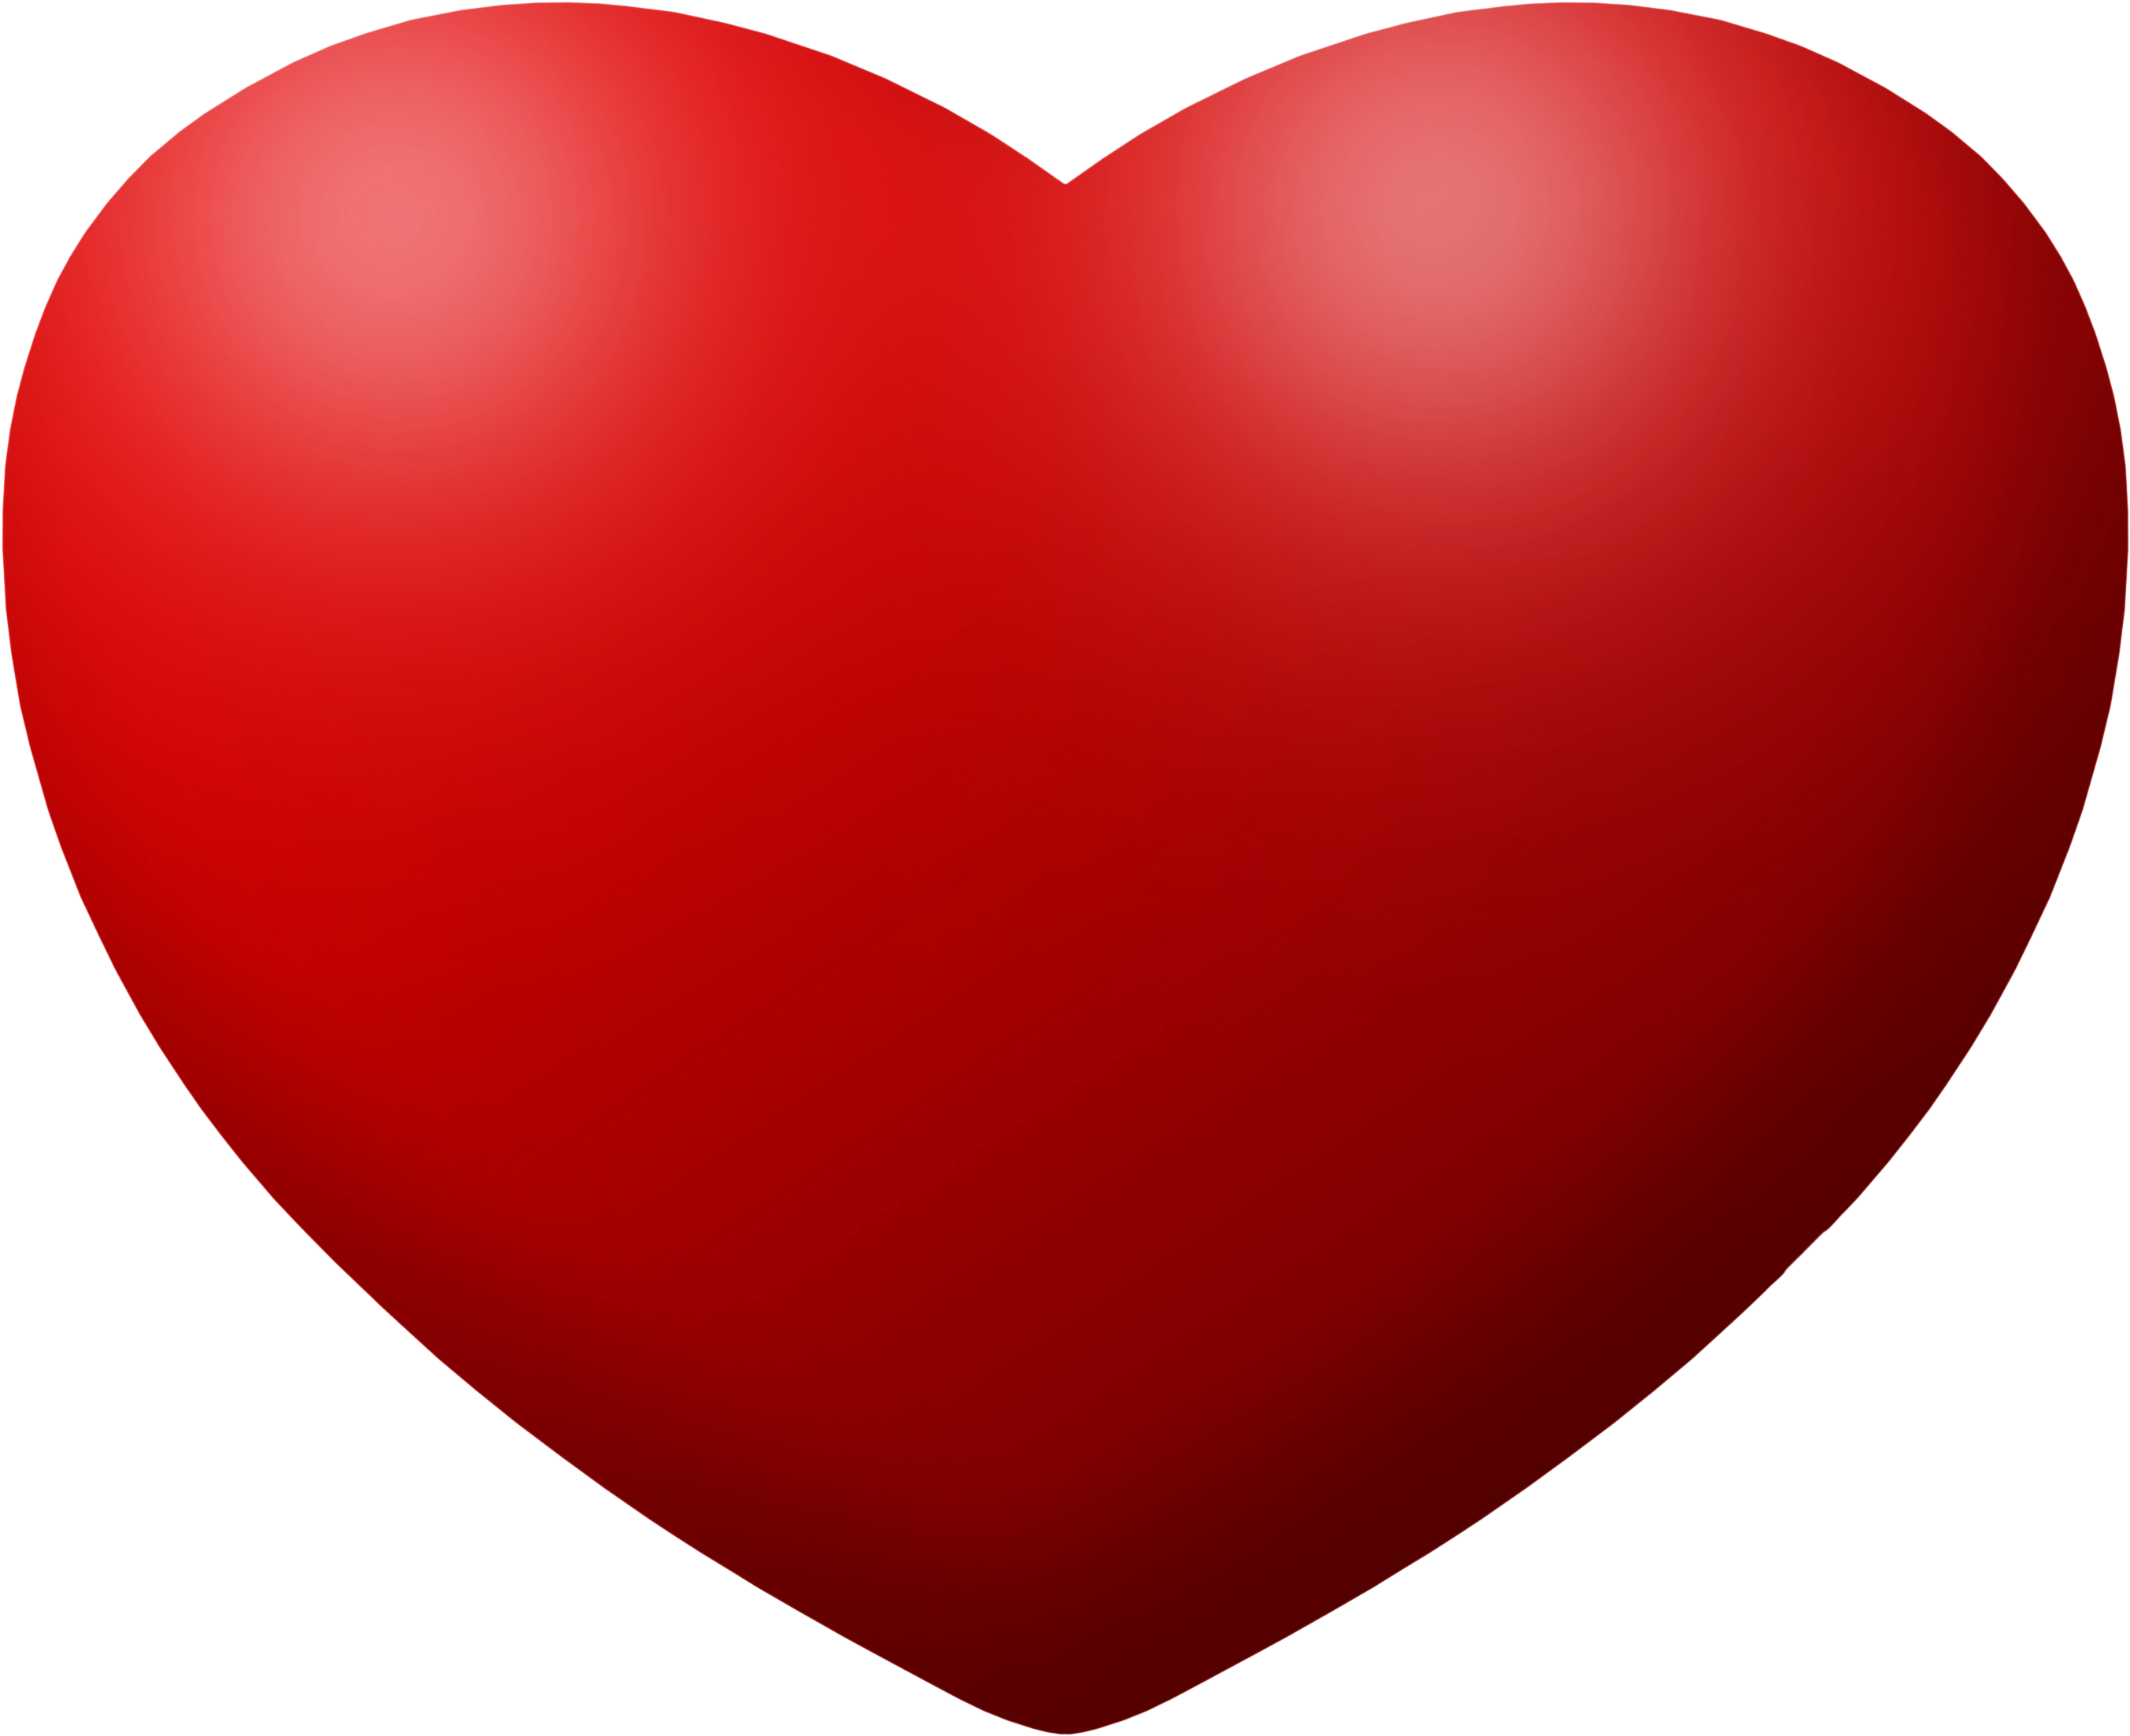 Download Free Heart Images Heart Png Hd Png Image With No Background Pngkey Com